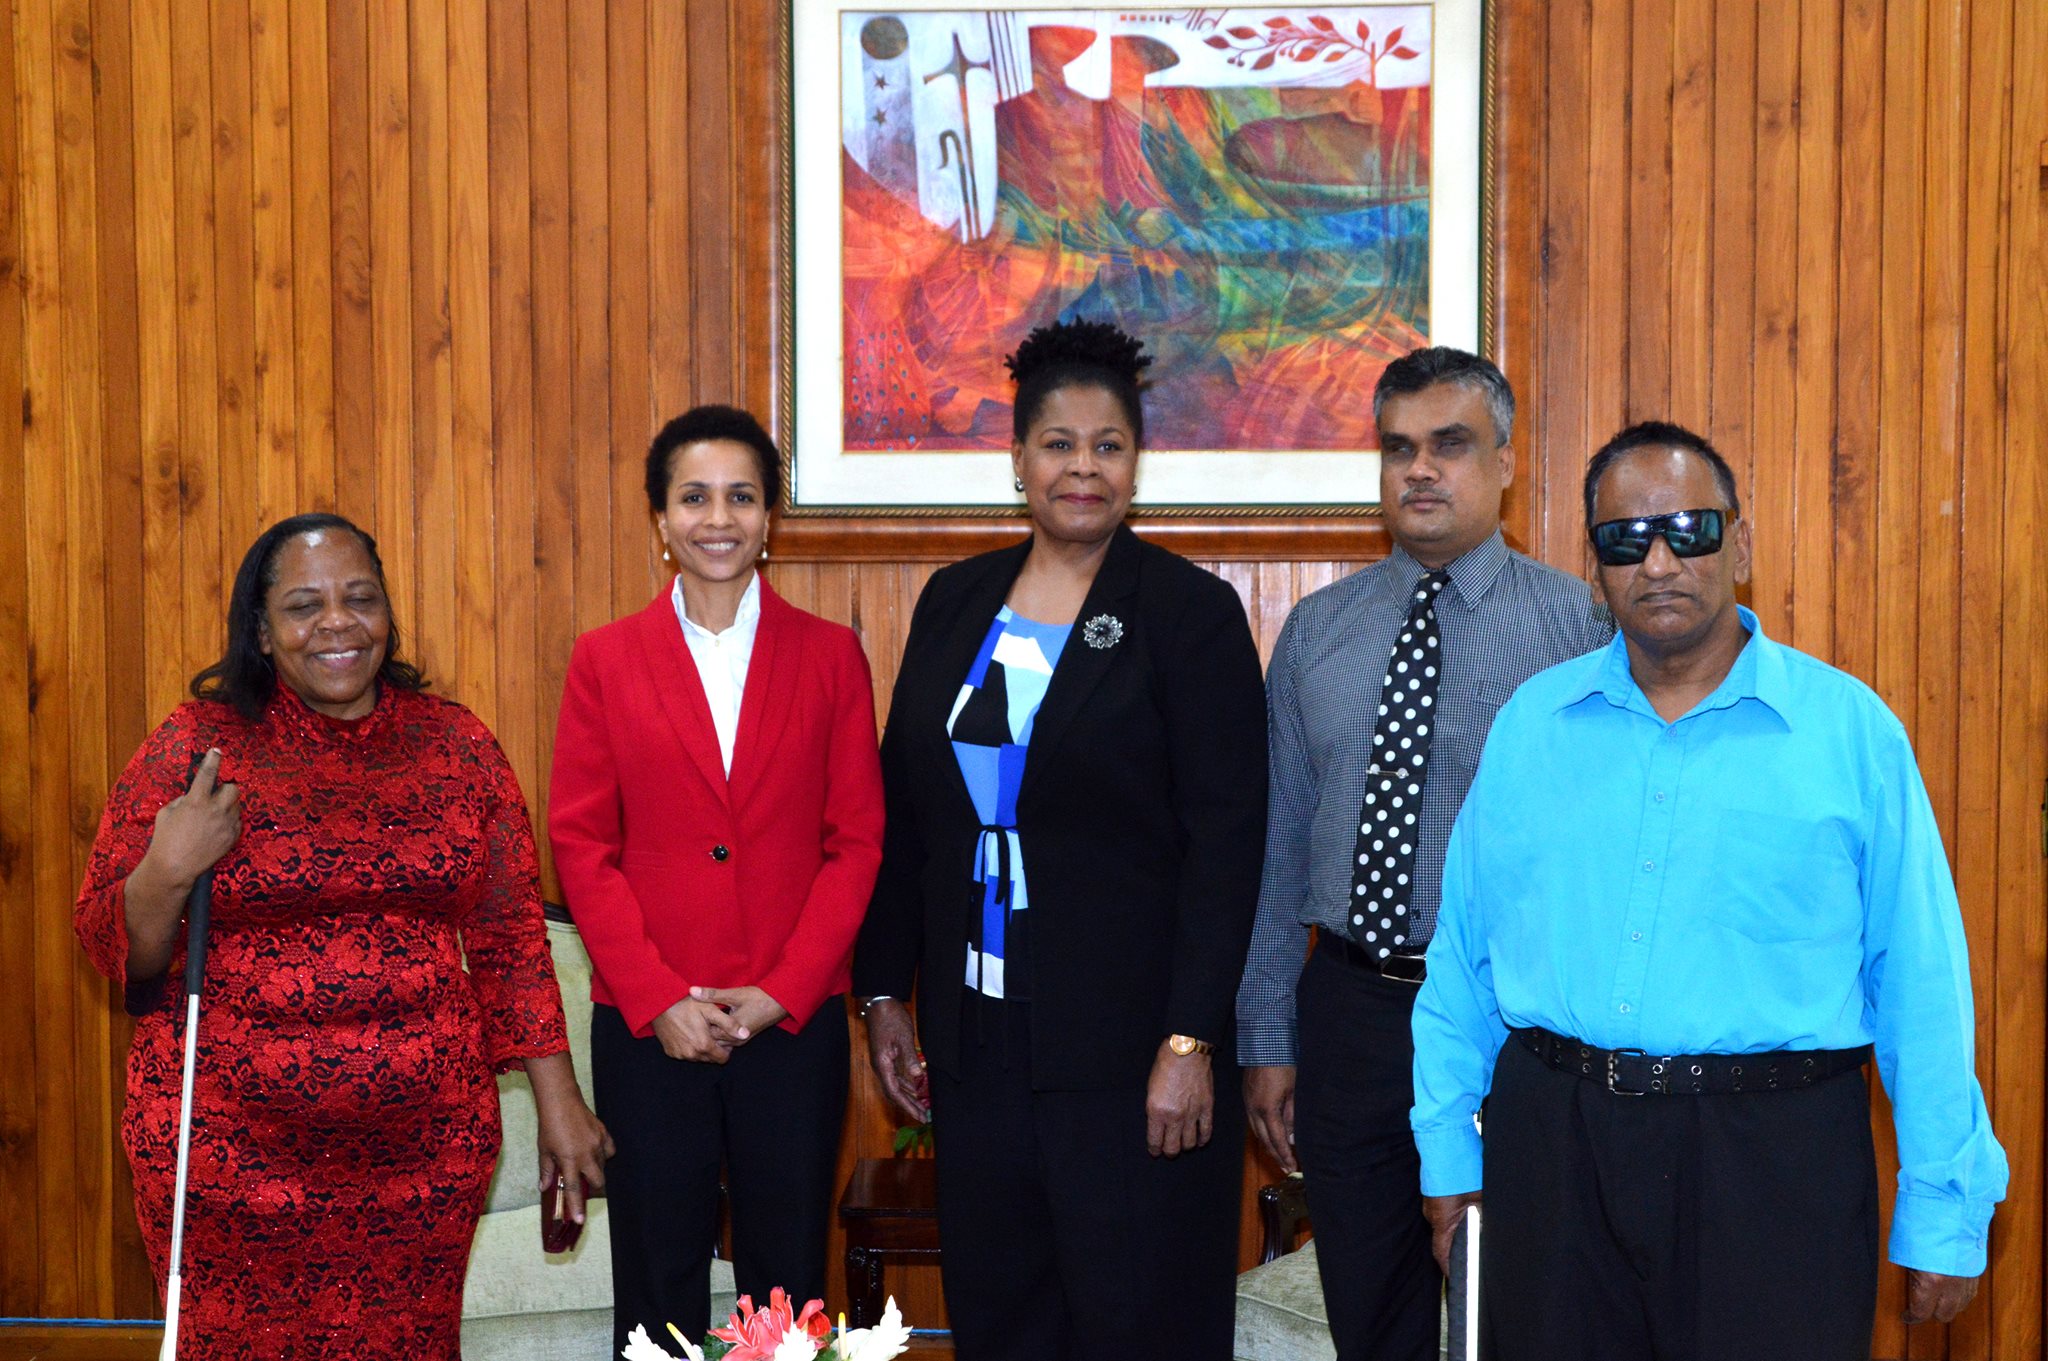 Courtesy Call: Representatives of Organisations for the Blind and Visually Impaired